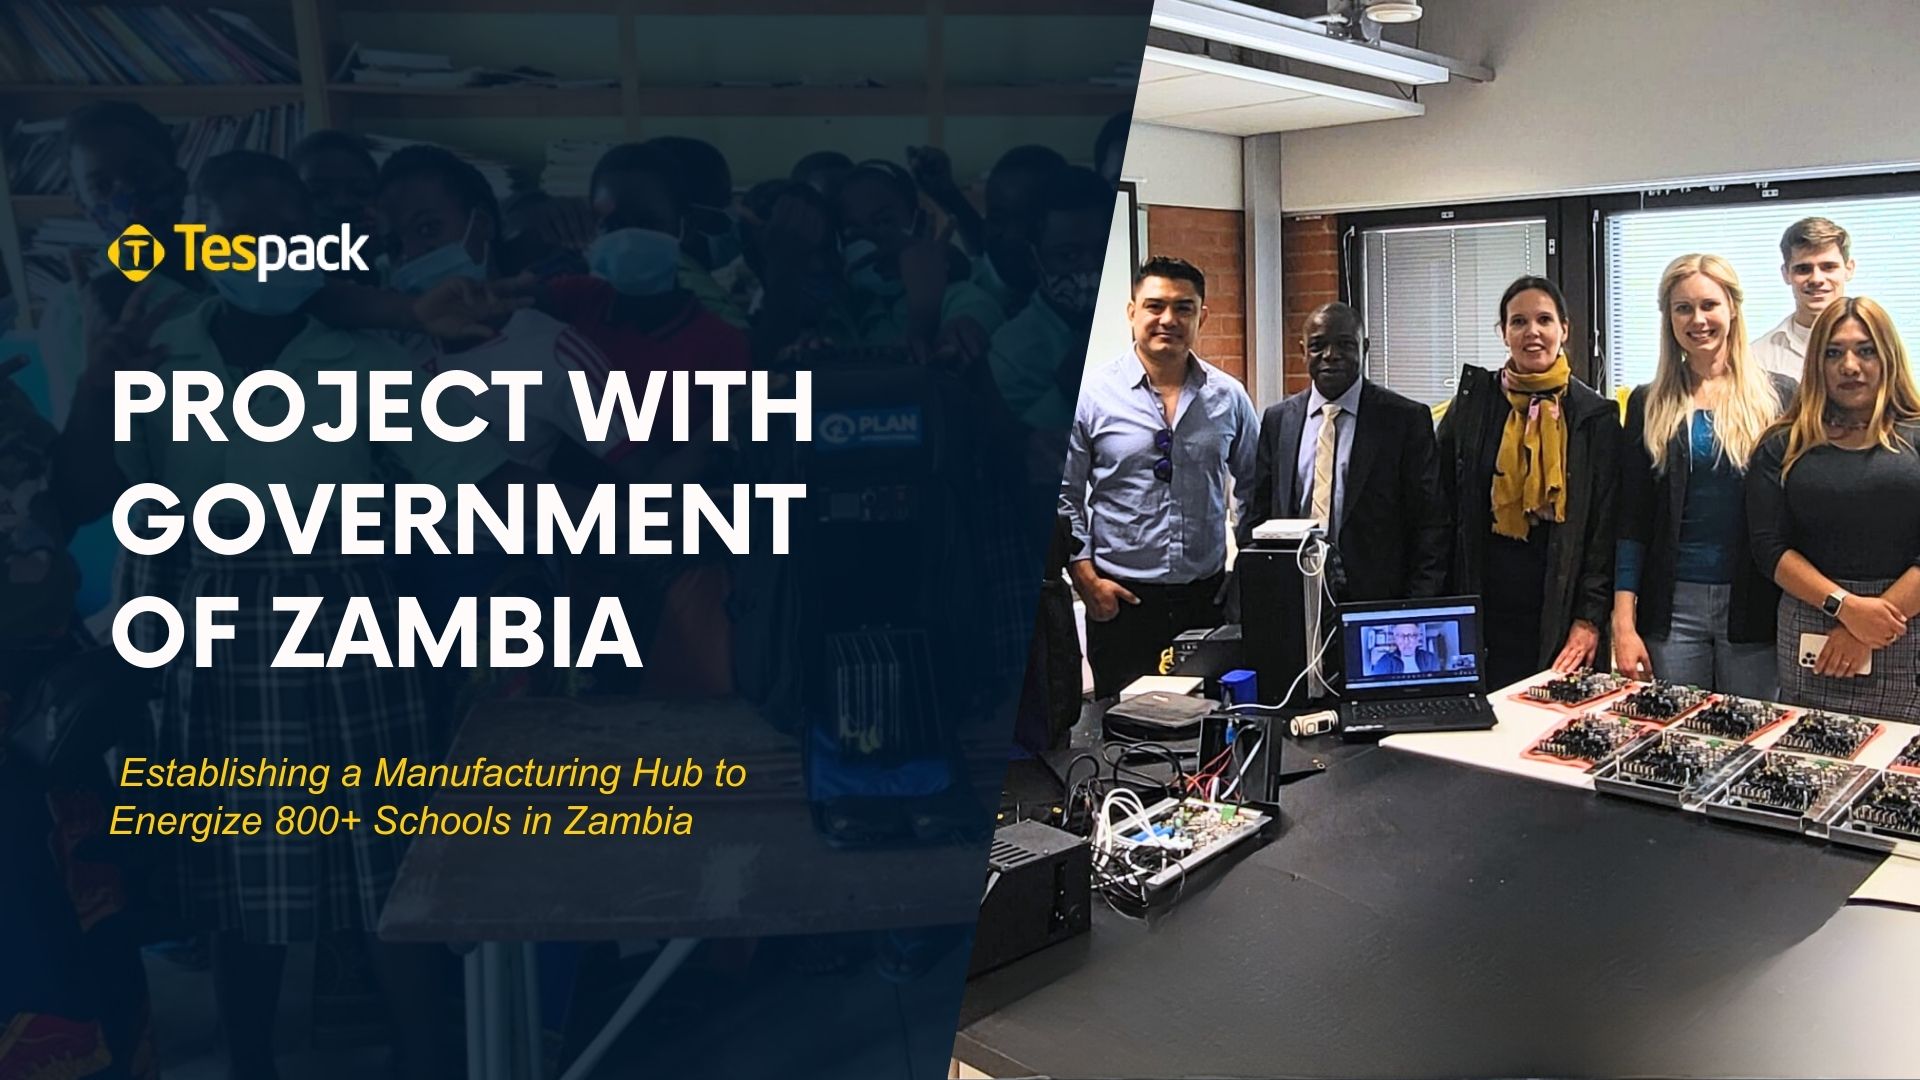 Partnership with Government of Zambia  Establishing a Manufacturing Hub to Energize 800+ Schools in Zambia